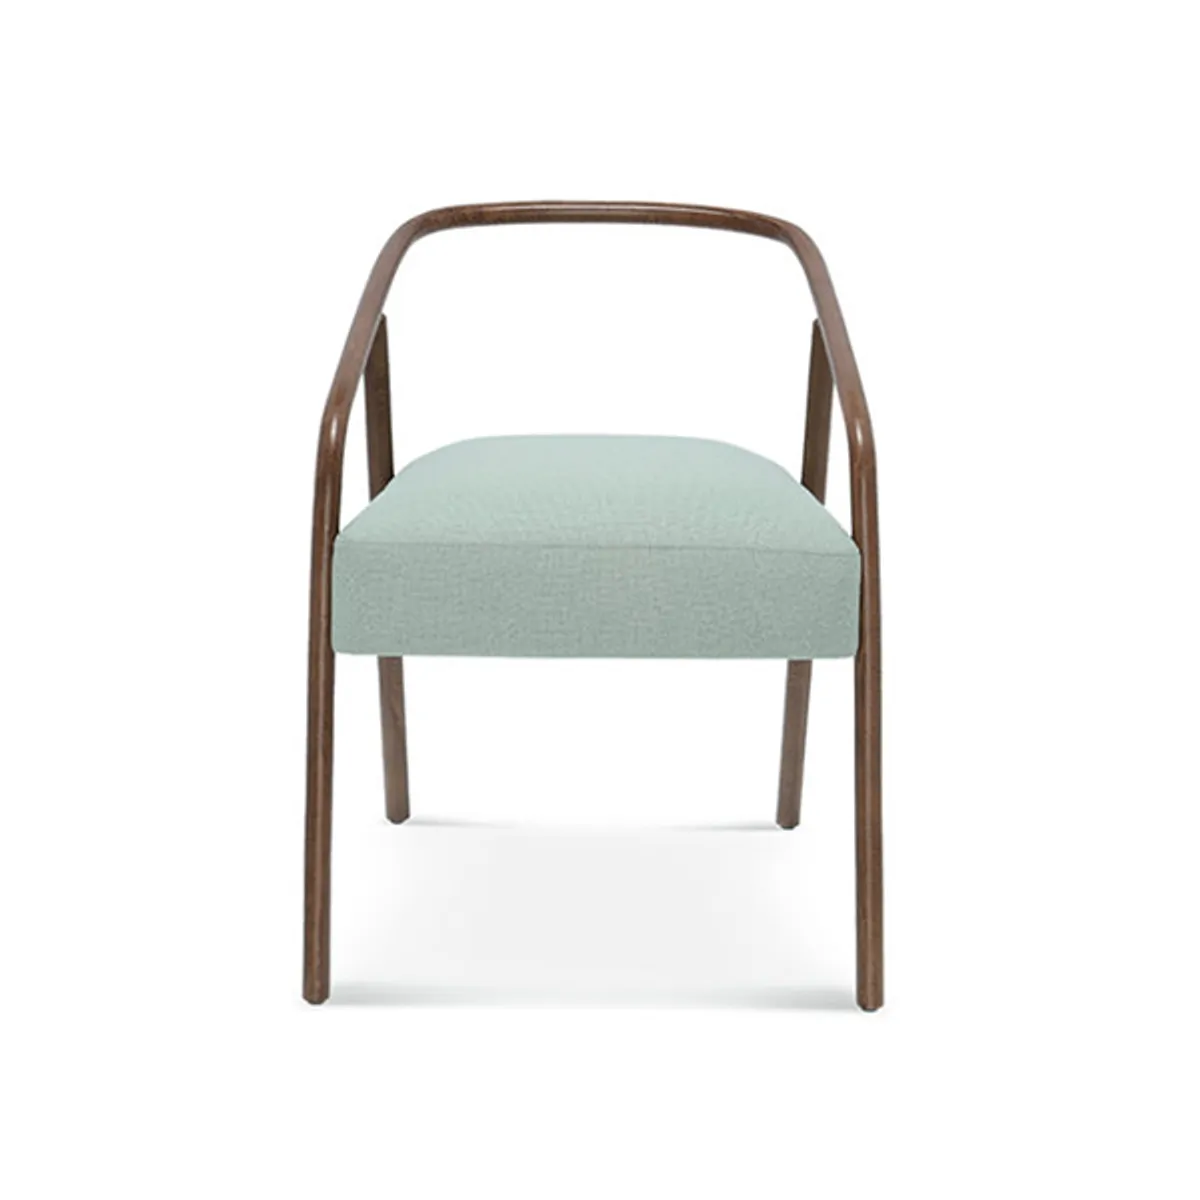 Nectar Armchair 2 Contemporary Bentwood Furniture Insideoutcontracts